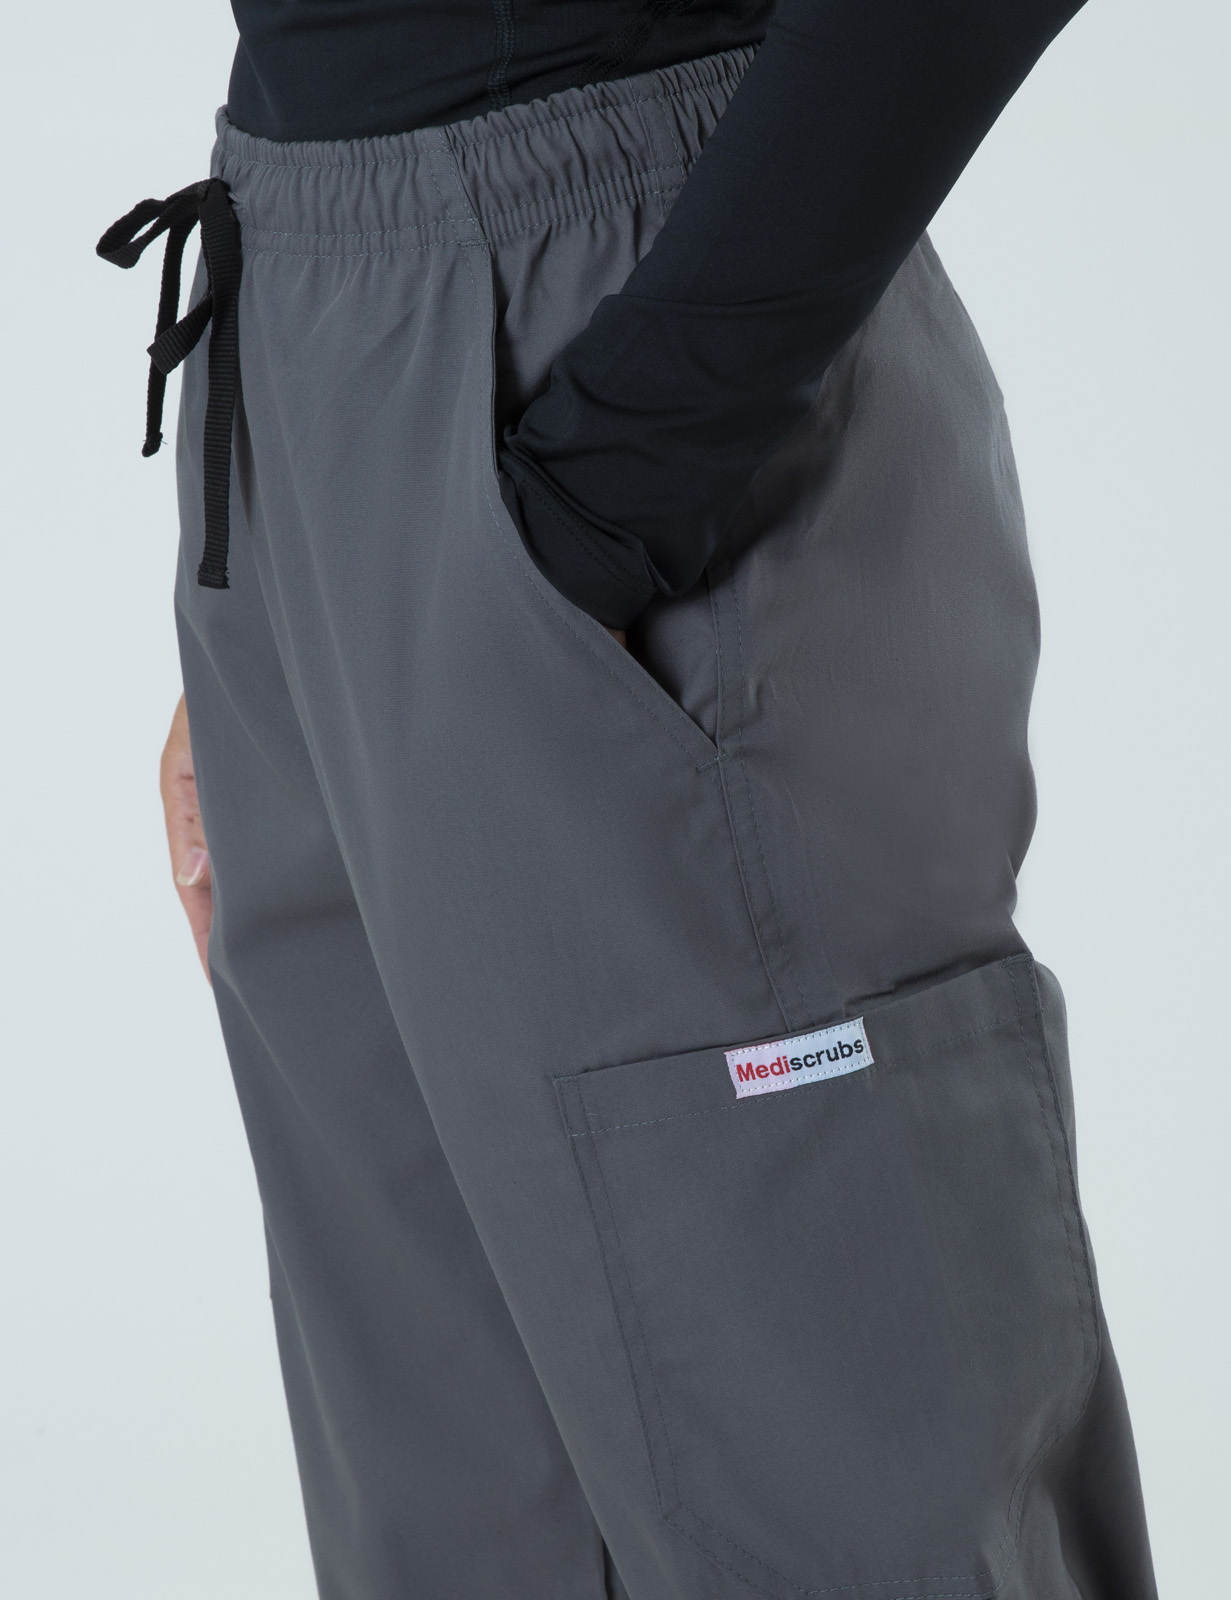 Cargo Pants Bundle - Pathology North - Coffs Harbour (pants only)(Cargo Pants in Steel Grey)